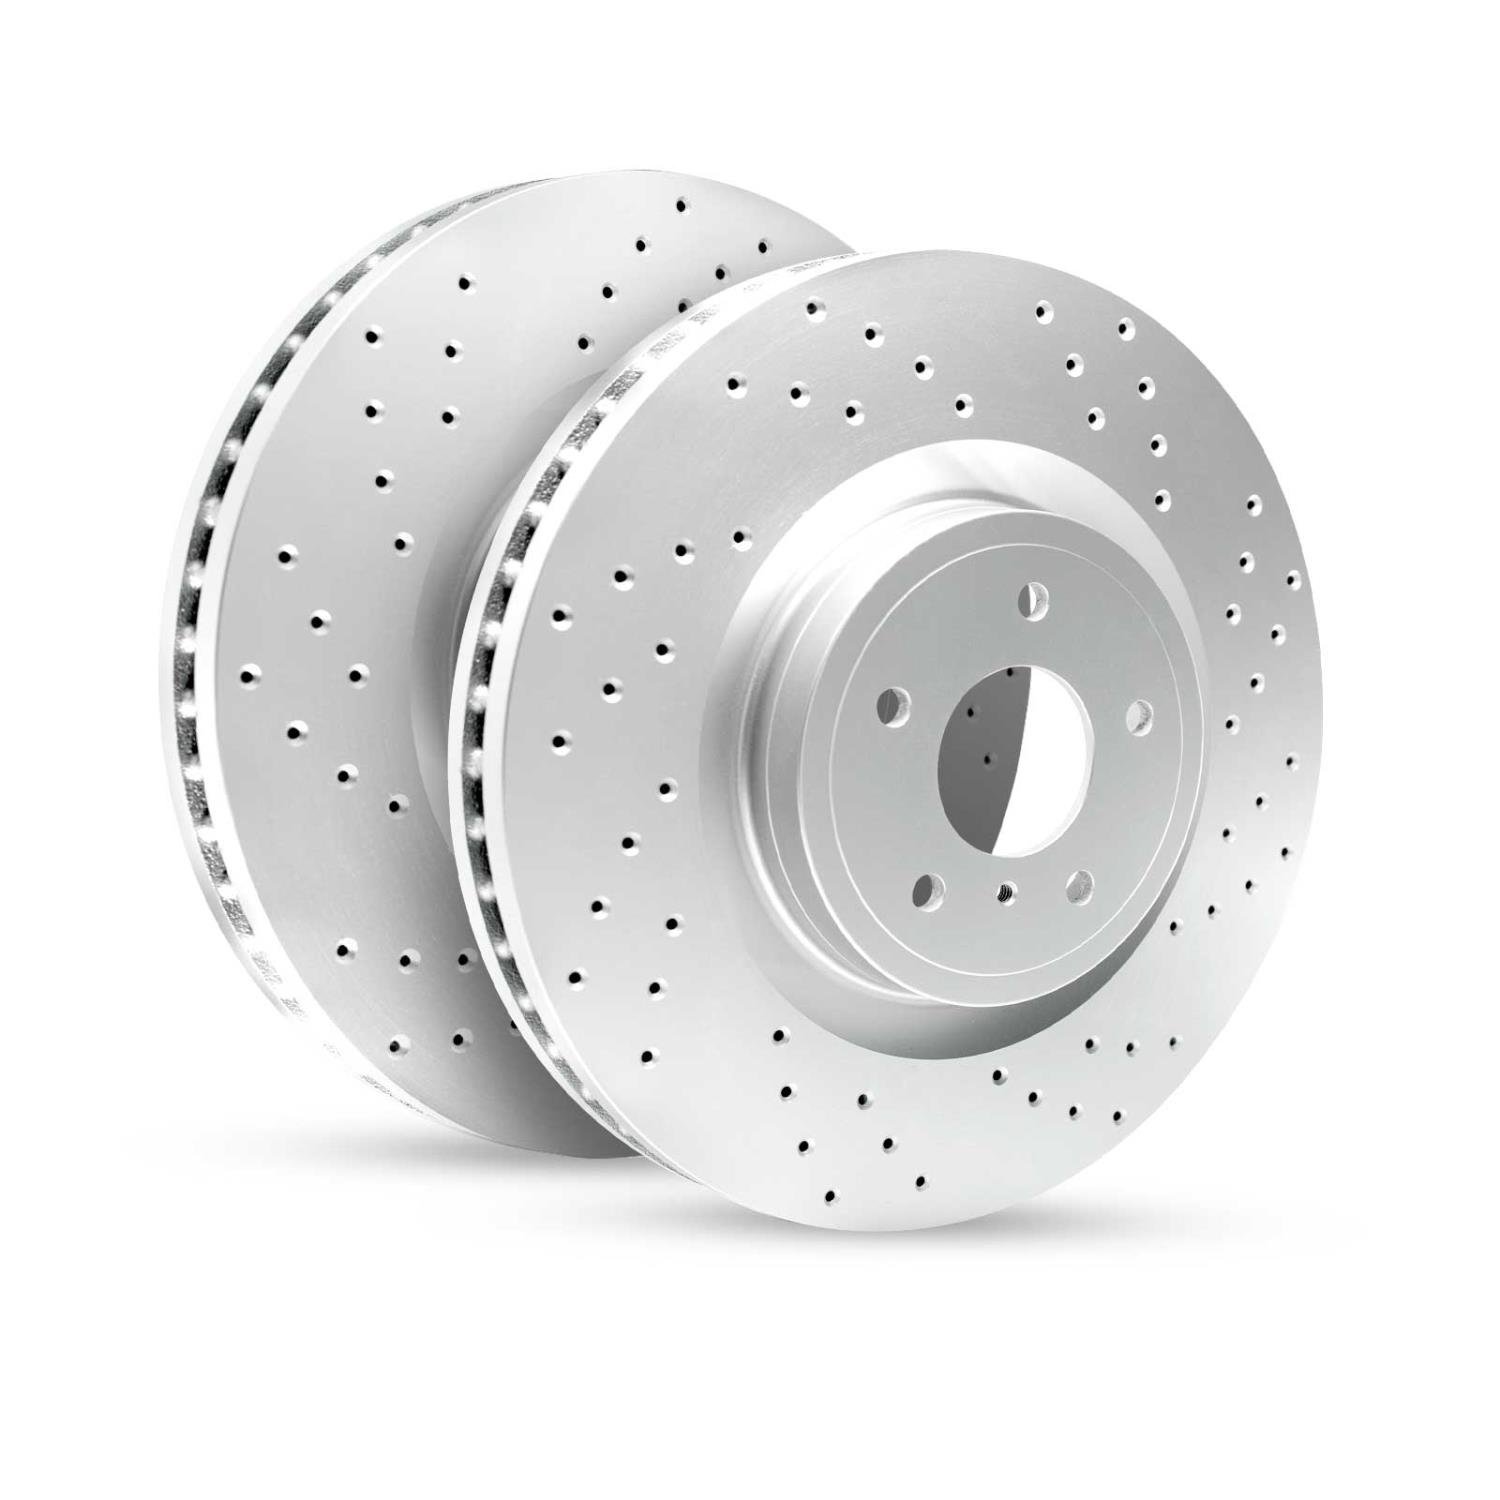 GEO-Carbon Drilled/Slotted Rotors, 2015-2020 Kia/Hyundai/Genesis, Position: Front